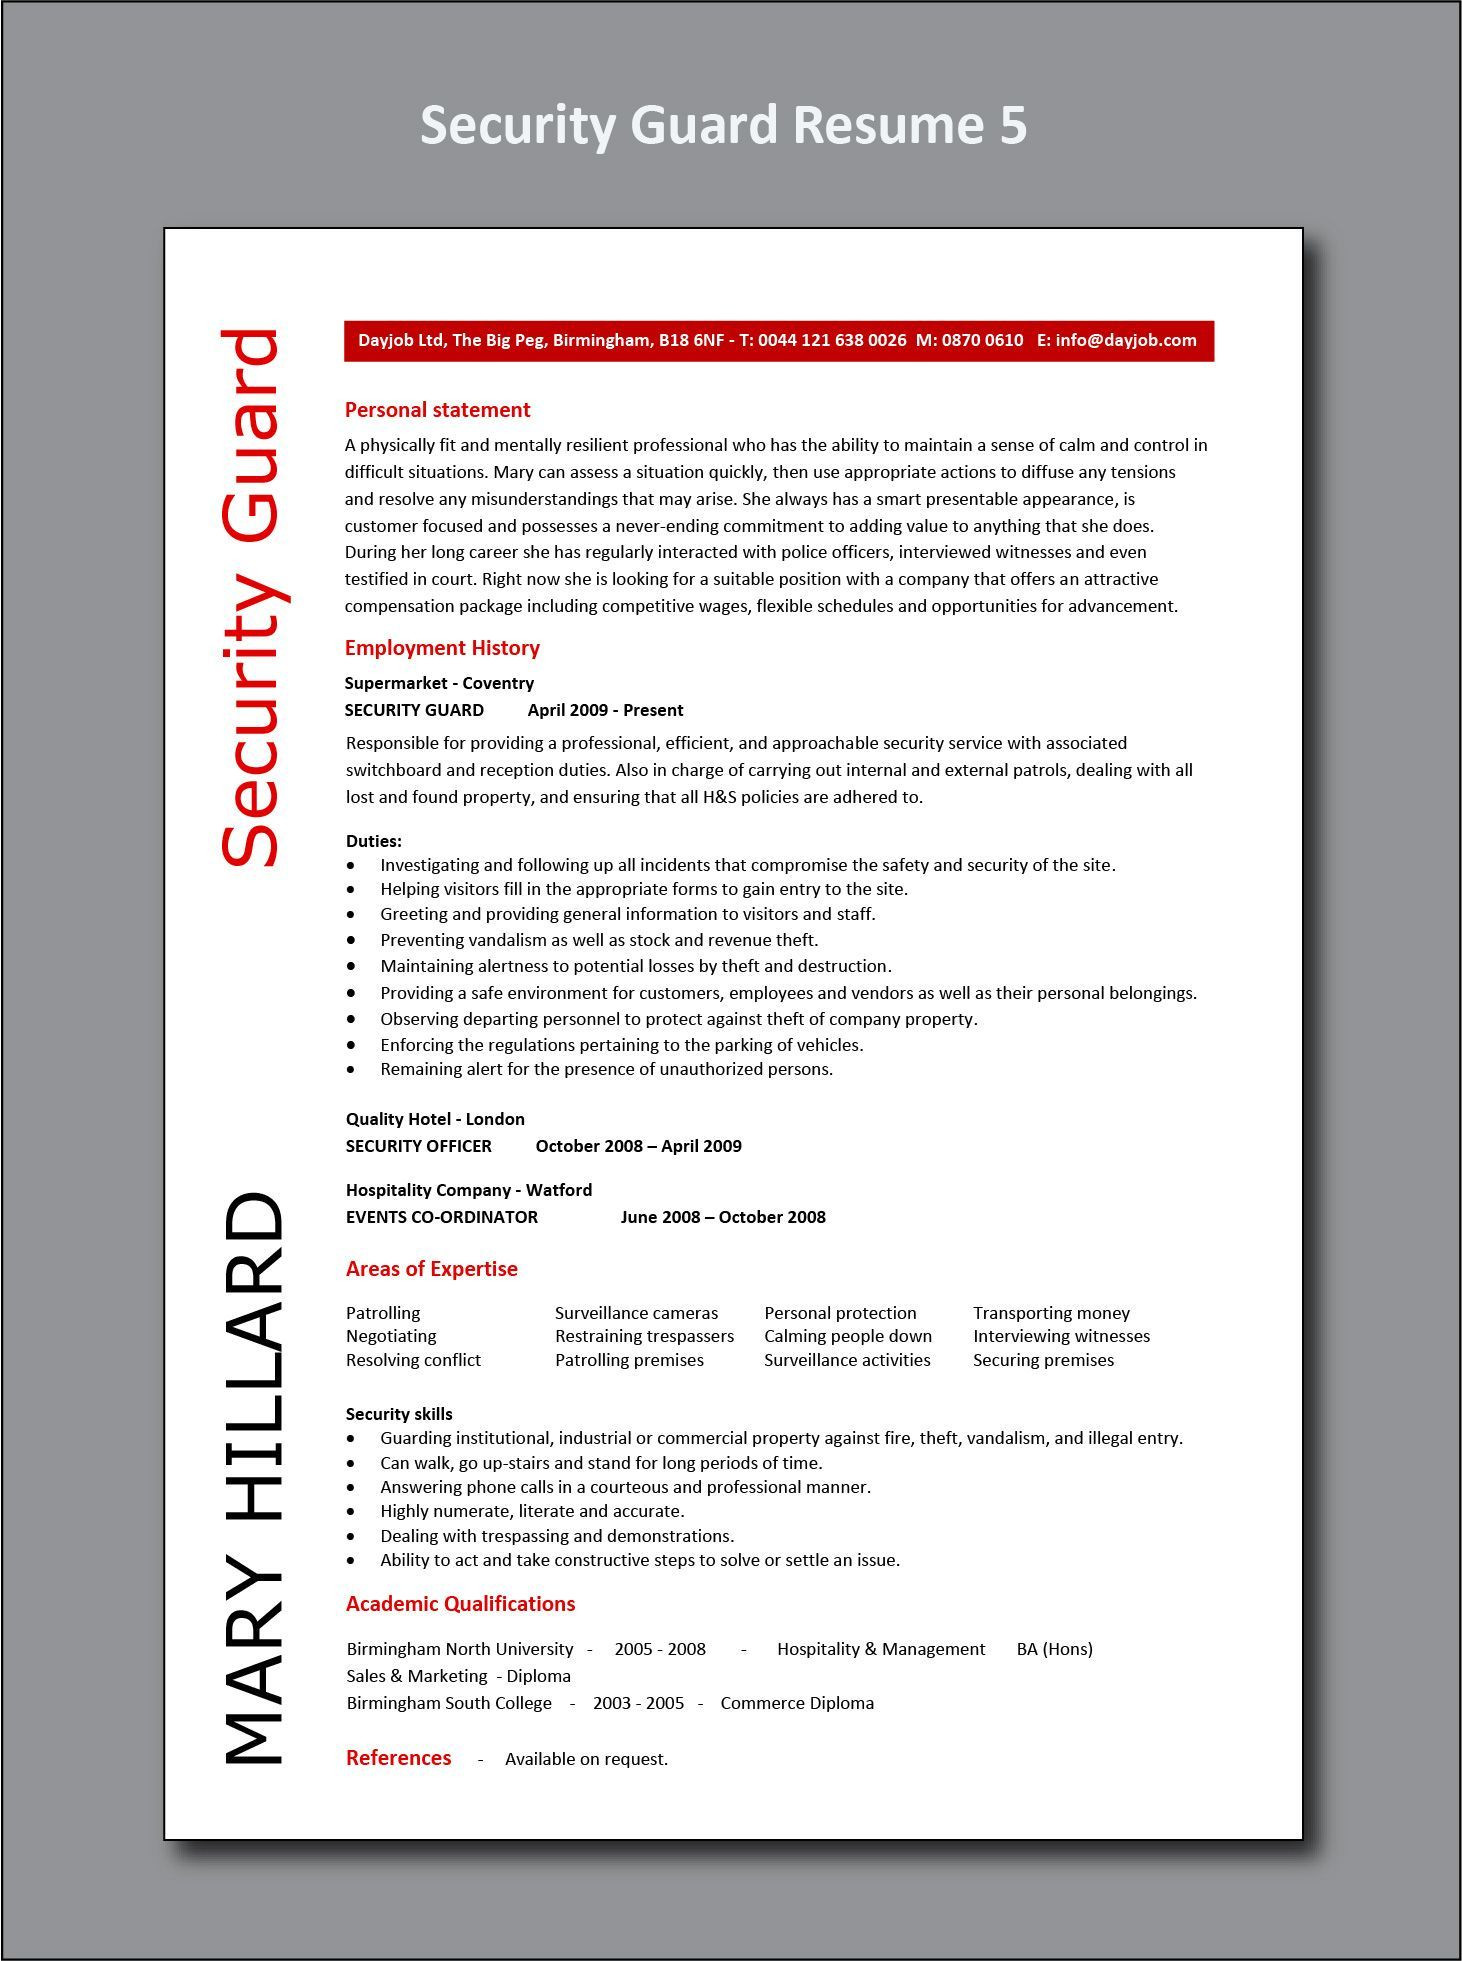 Sample Resume for Security Guard Pdf Security Guard Resume 5 Example, Cv, Sample, Officer, Supervisor …